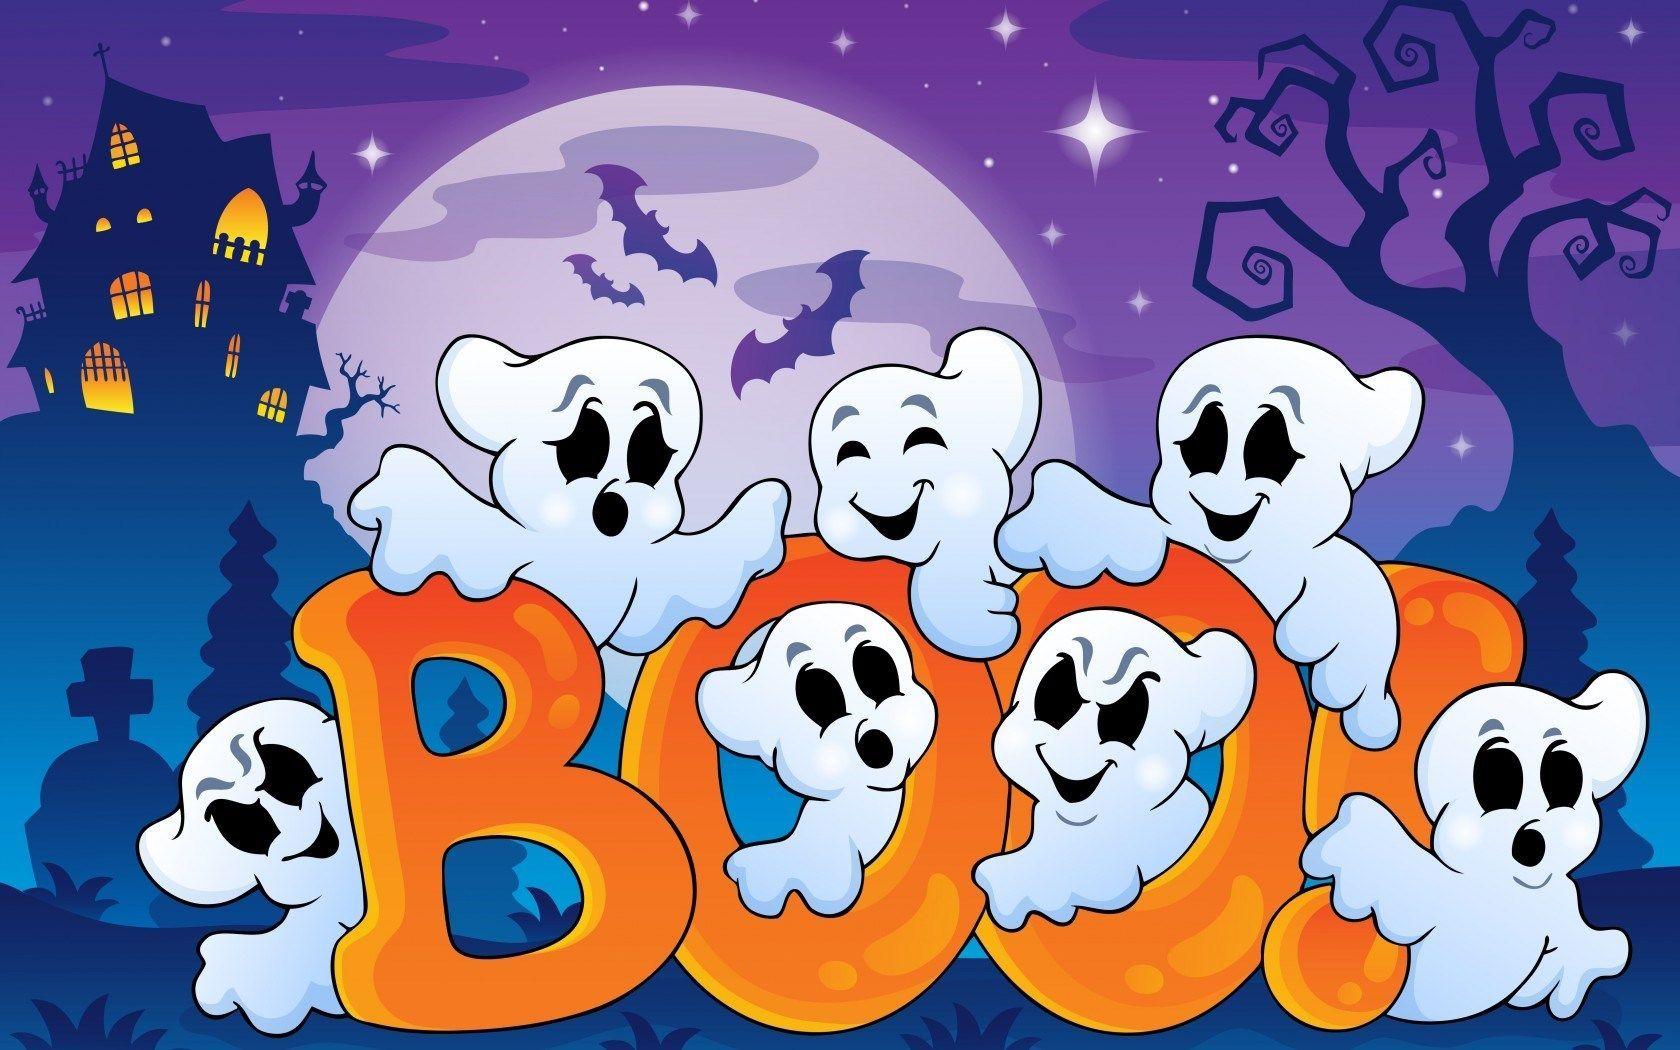 Disney Shares New Halloween Wallpaper For Your Computer Or Phone   MickeyBlogcom